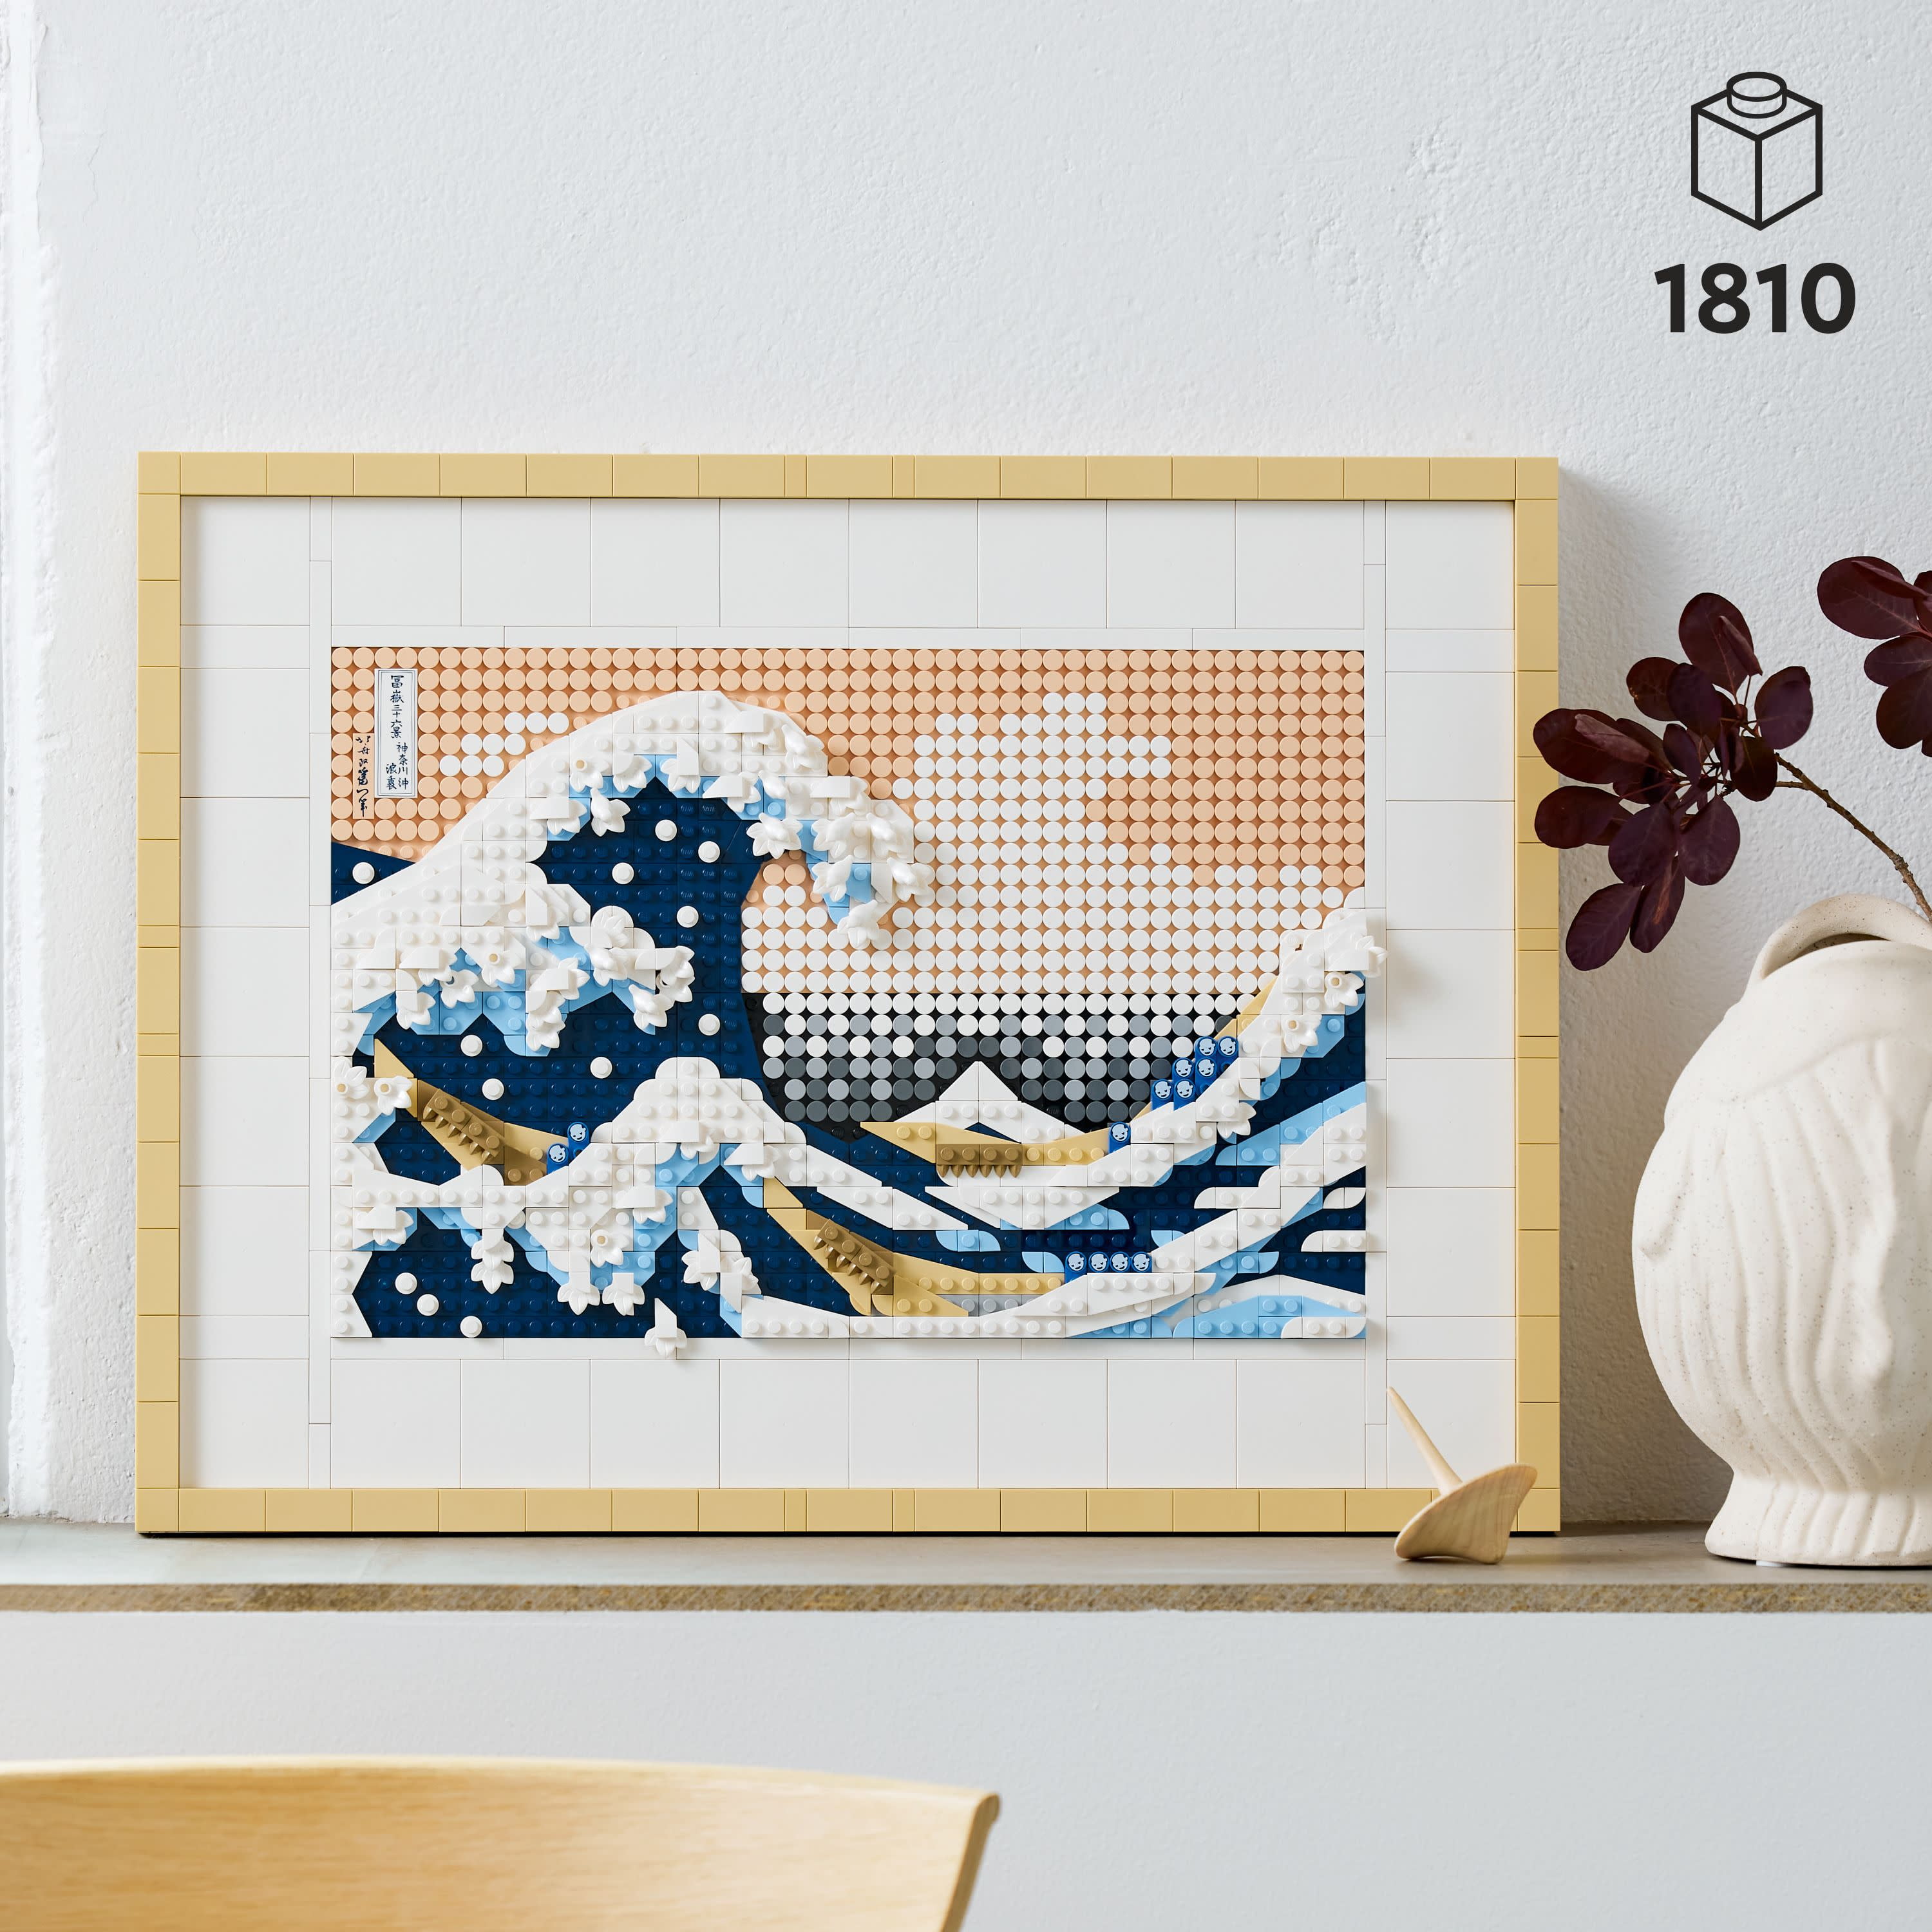 Lego Art Hokusai – The Great Wave 31208, 3D Japanese Wall Art, Framed Ocean  Canvas Picture, Decor - Maya Toys